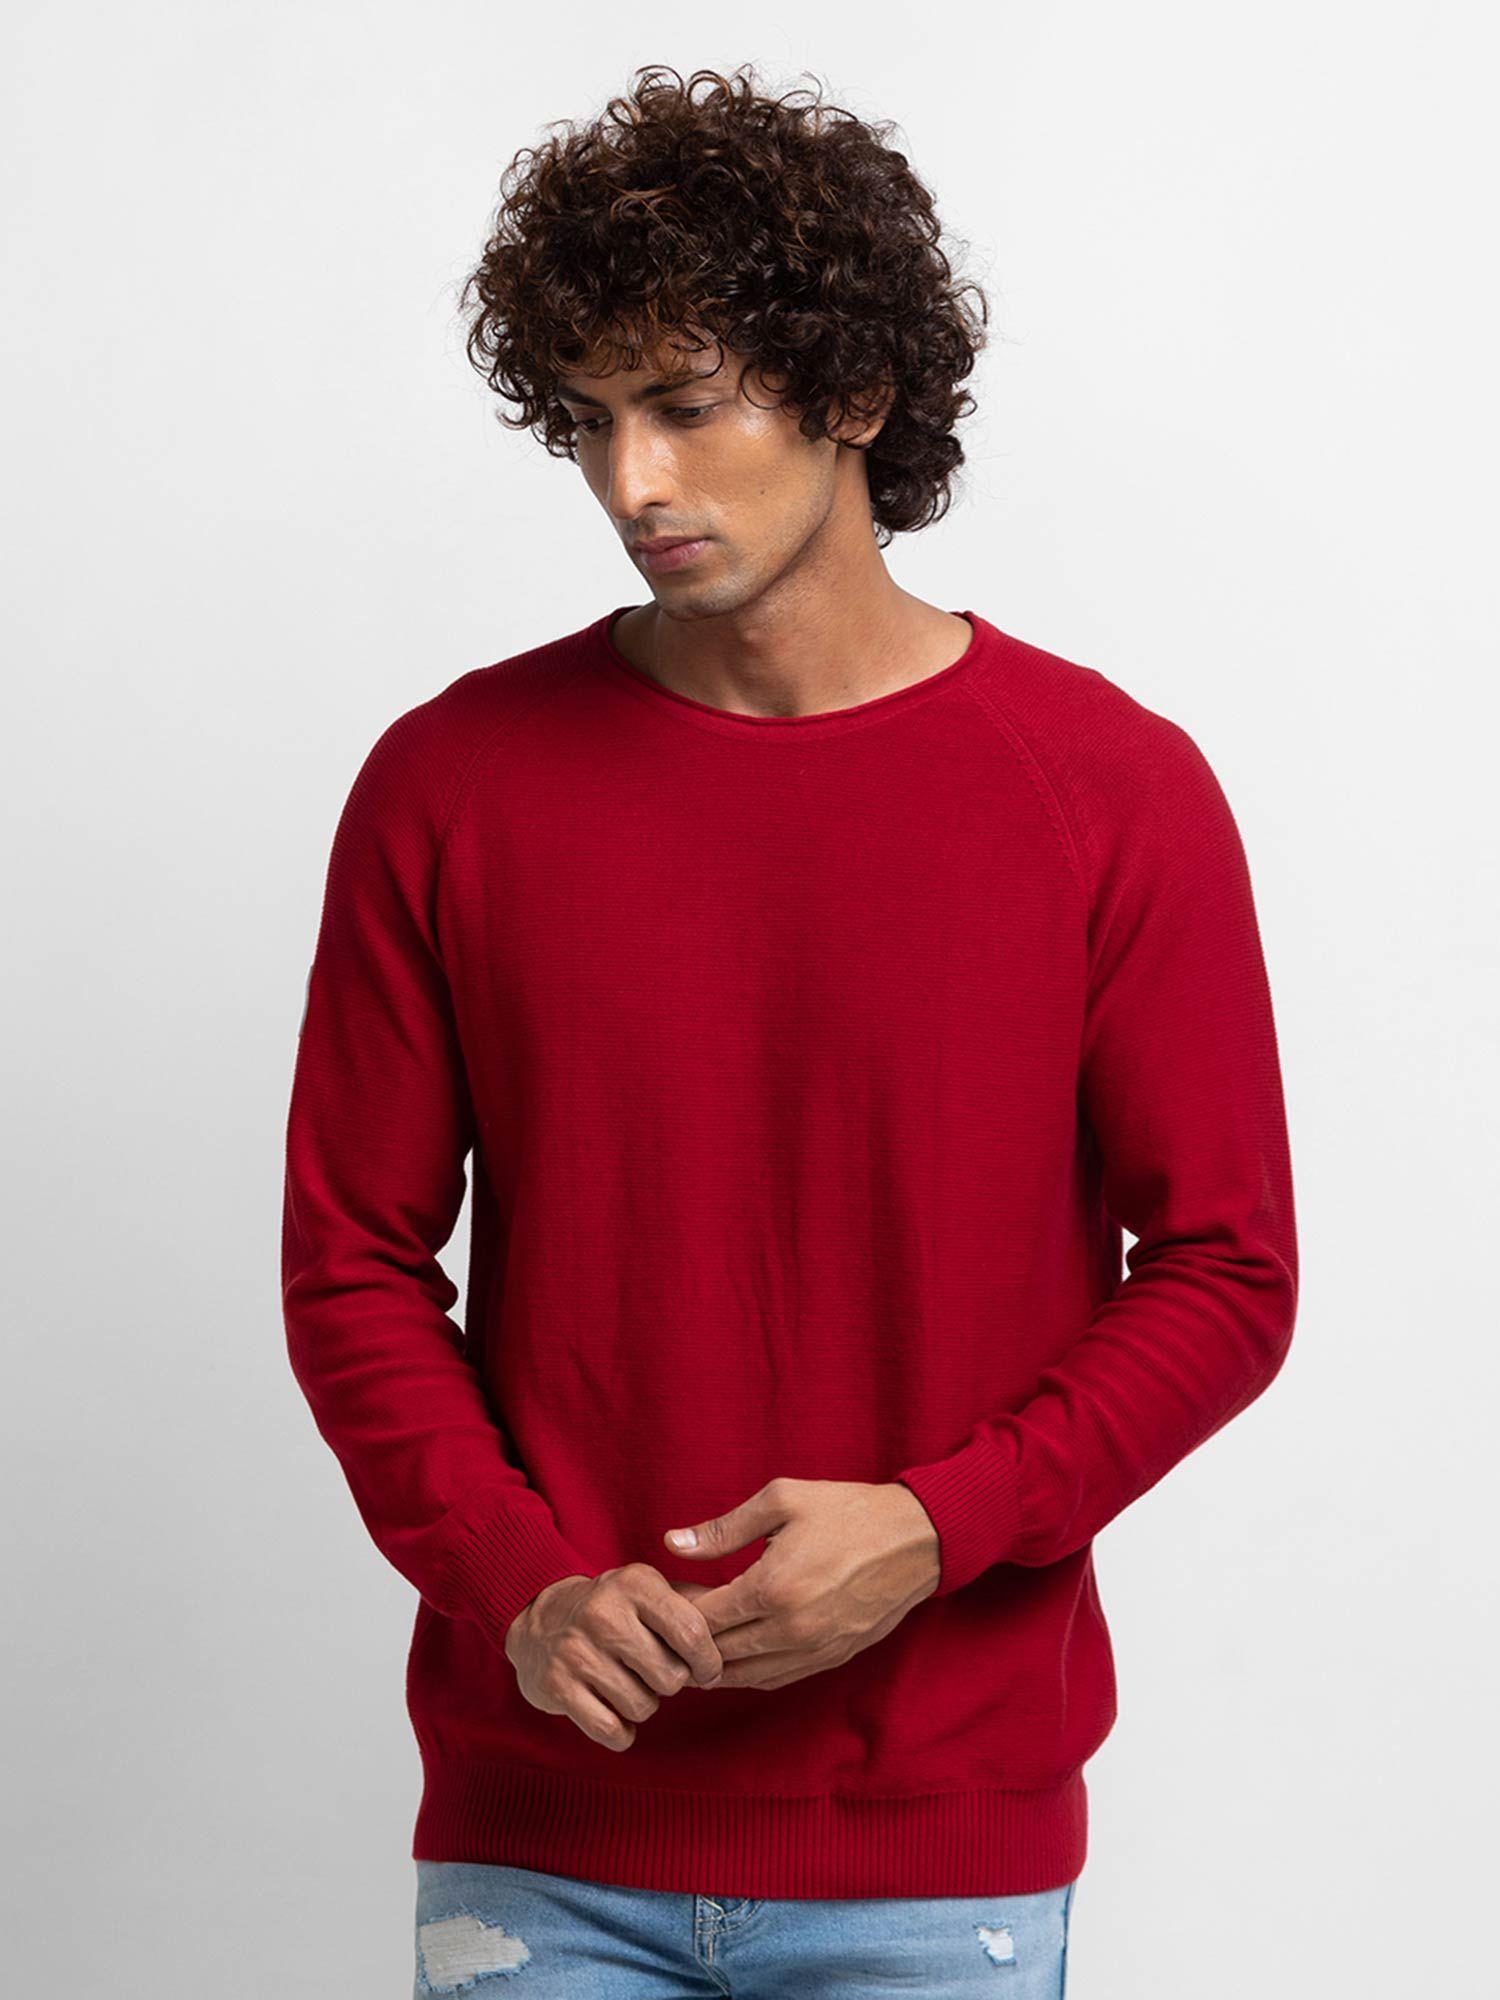 deep-red-cotton-full-sleeve-casual-sweater-for-men